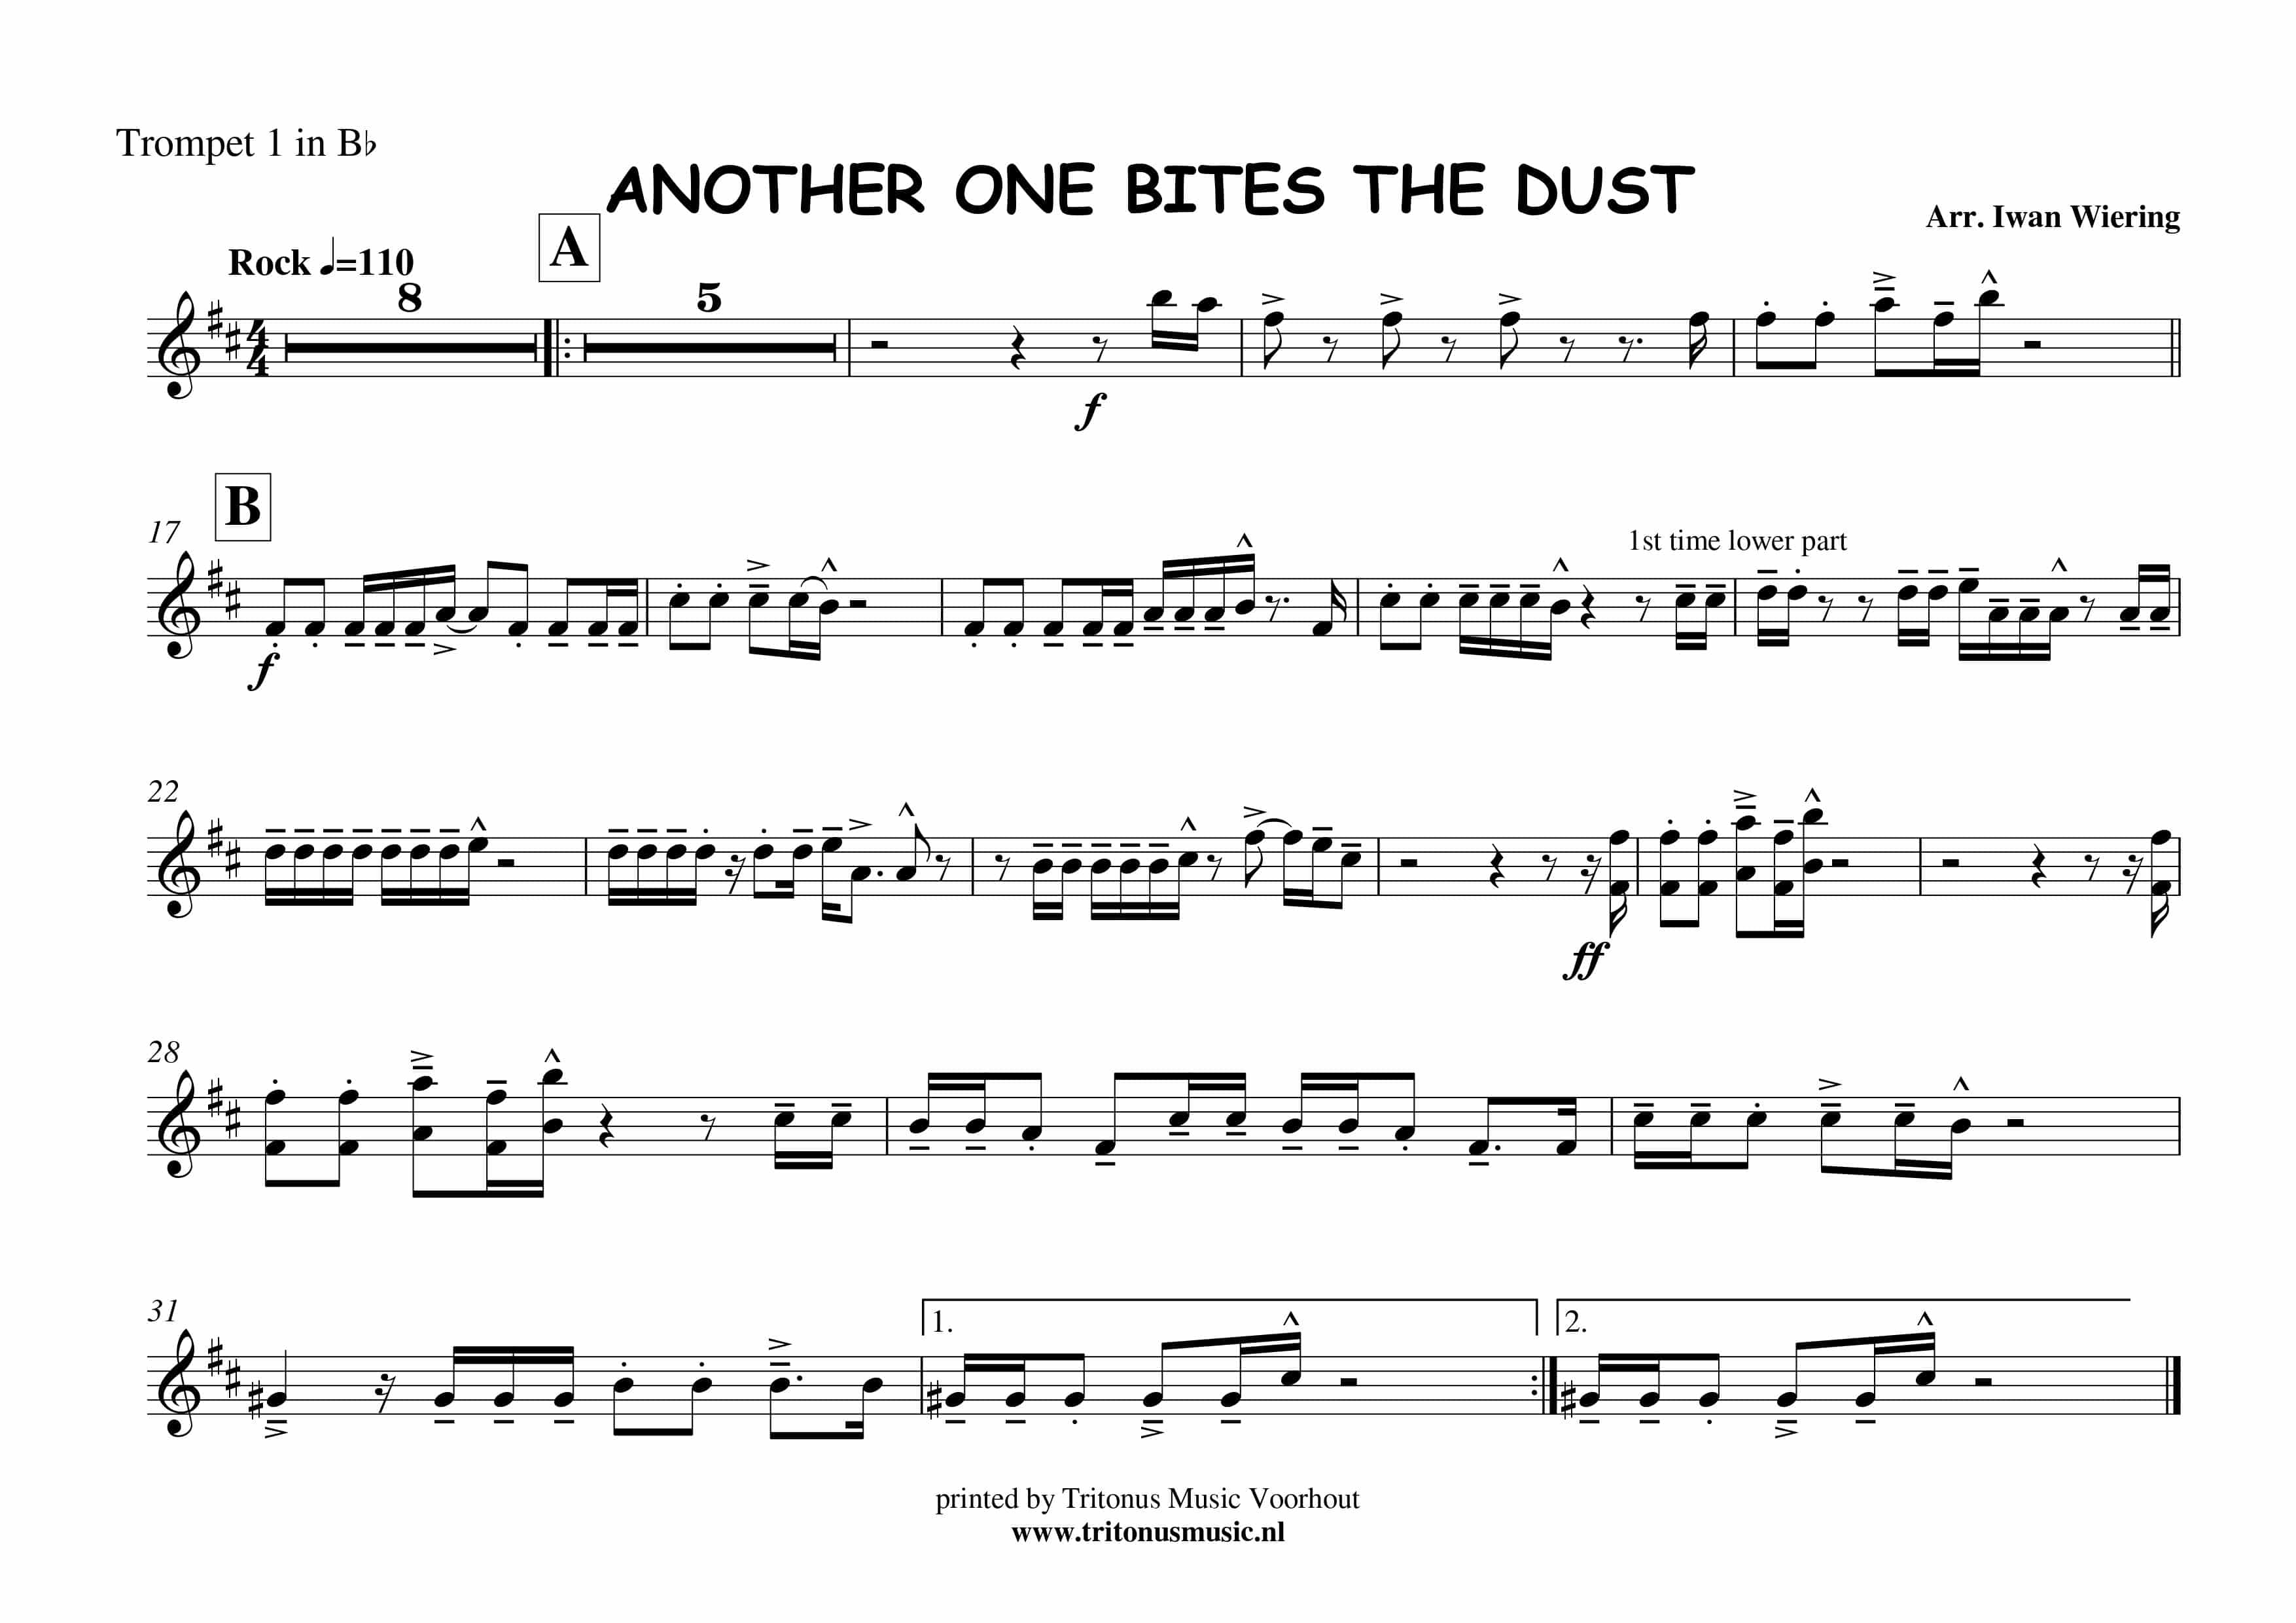 how to play another one bites the dust on trumpet